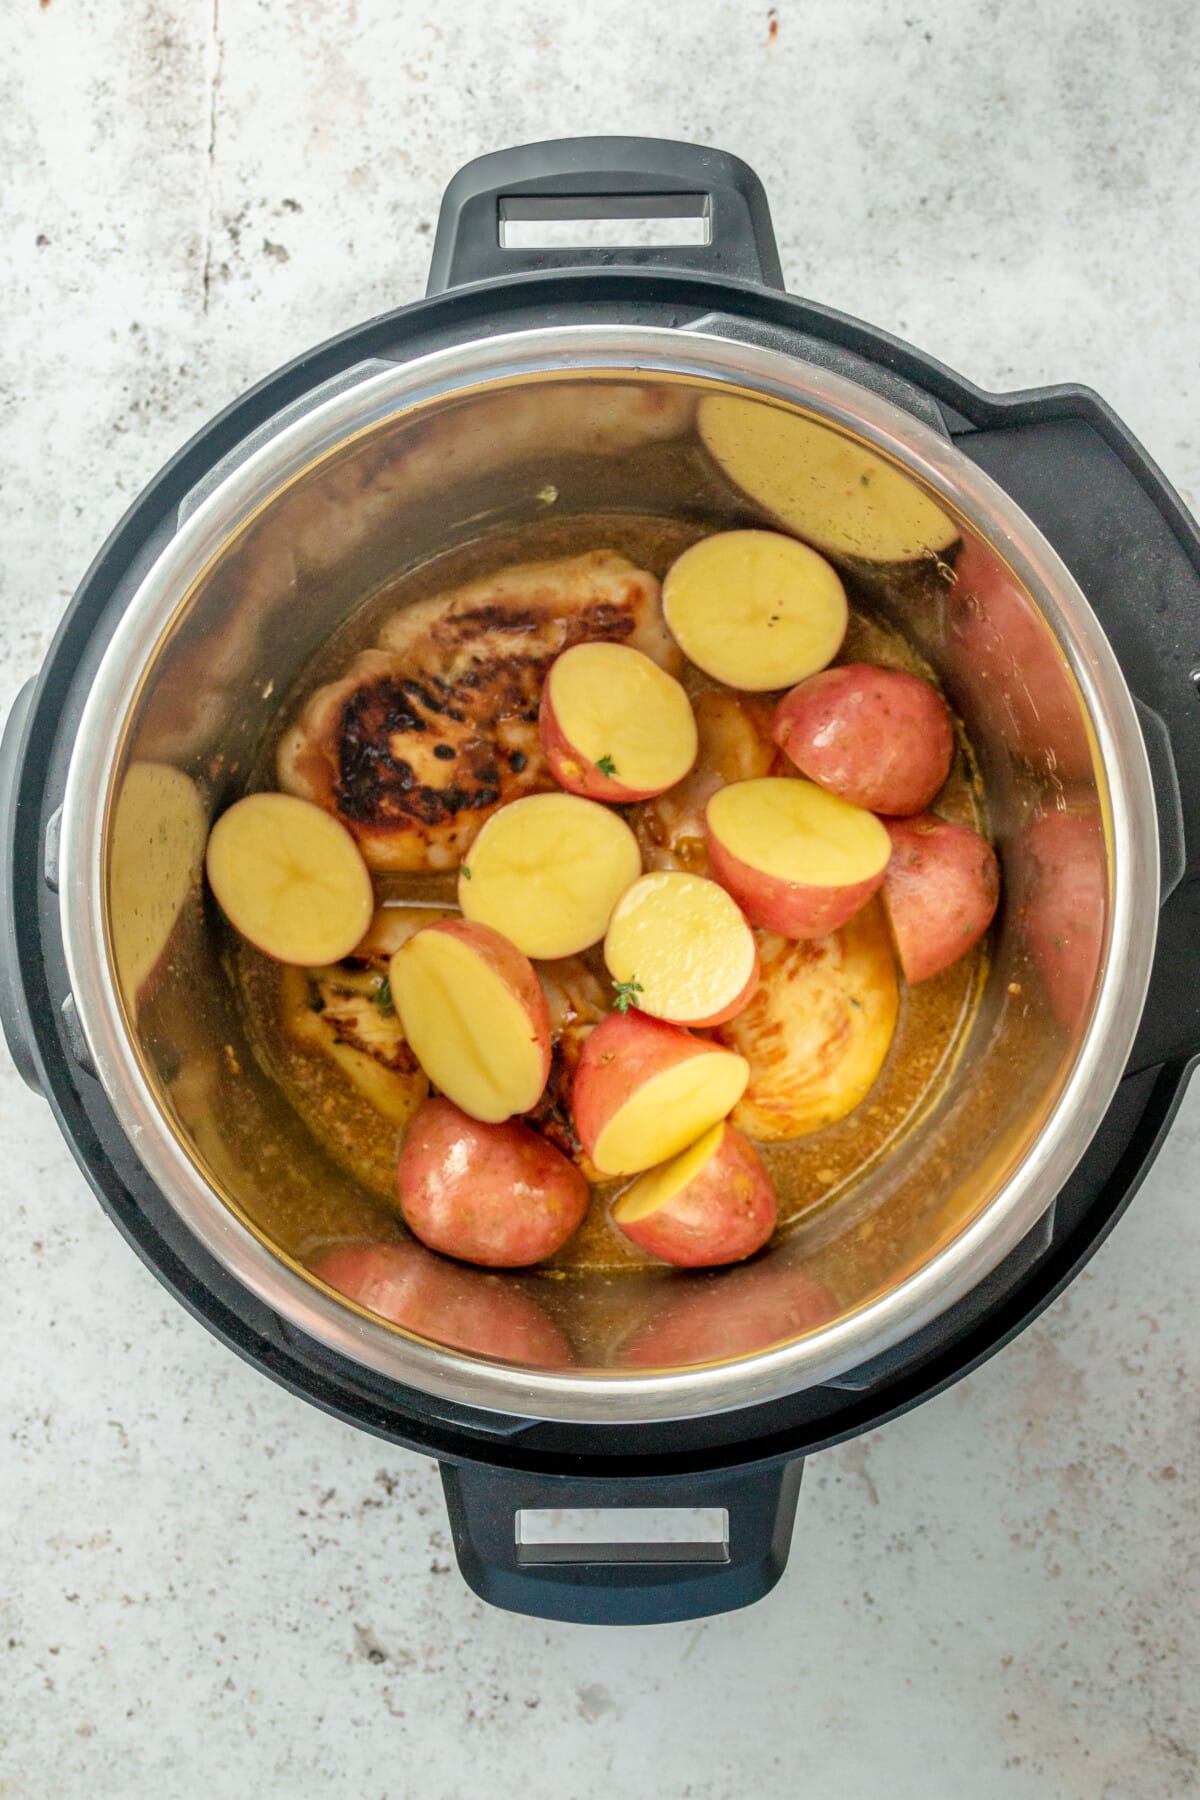 Red potatoes have been placed on top of chicken fillets inside an instant pot, sitting on a light grey colored surface.